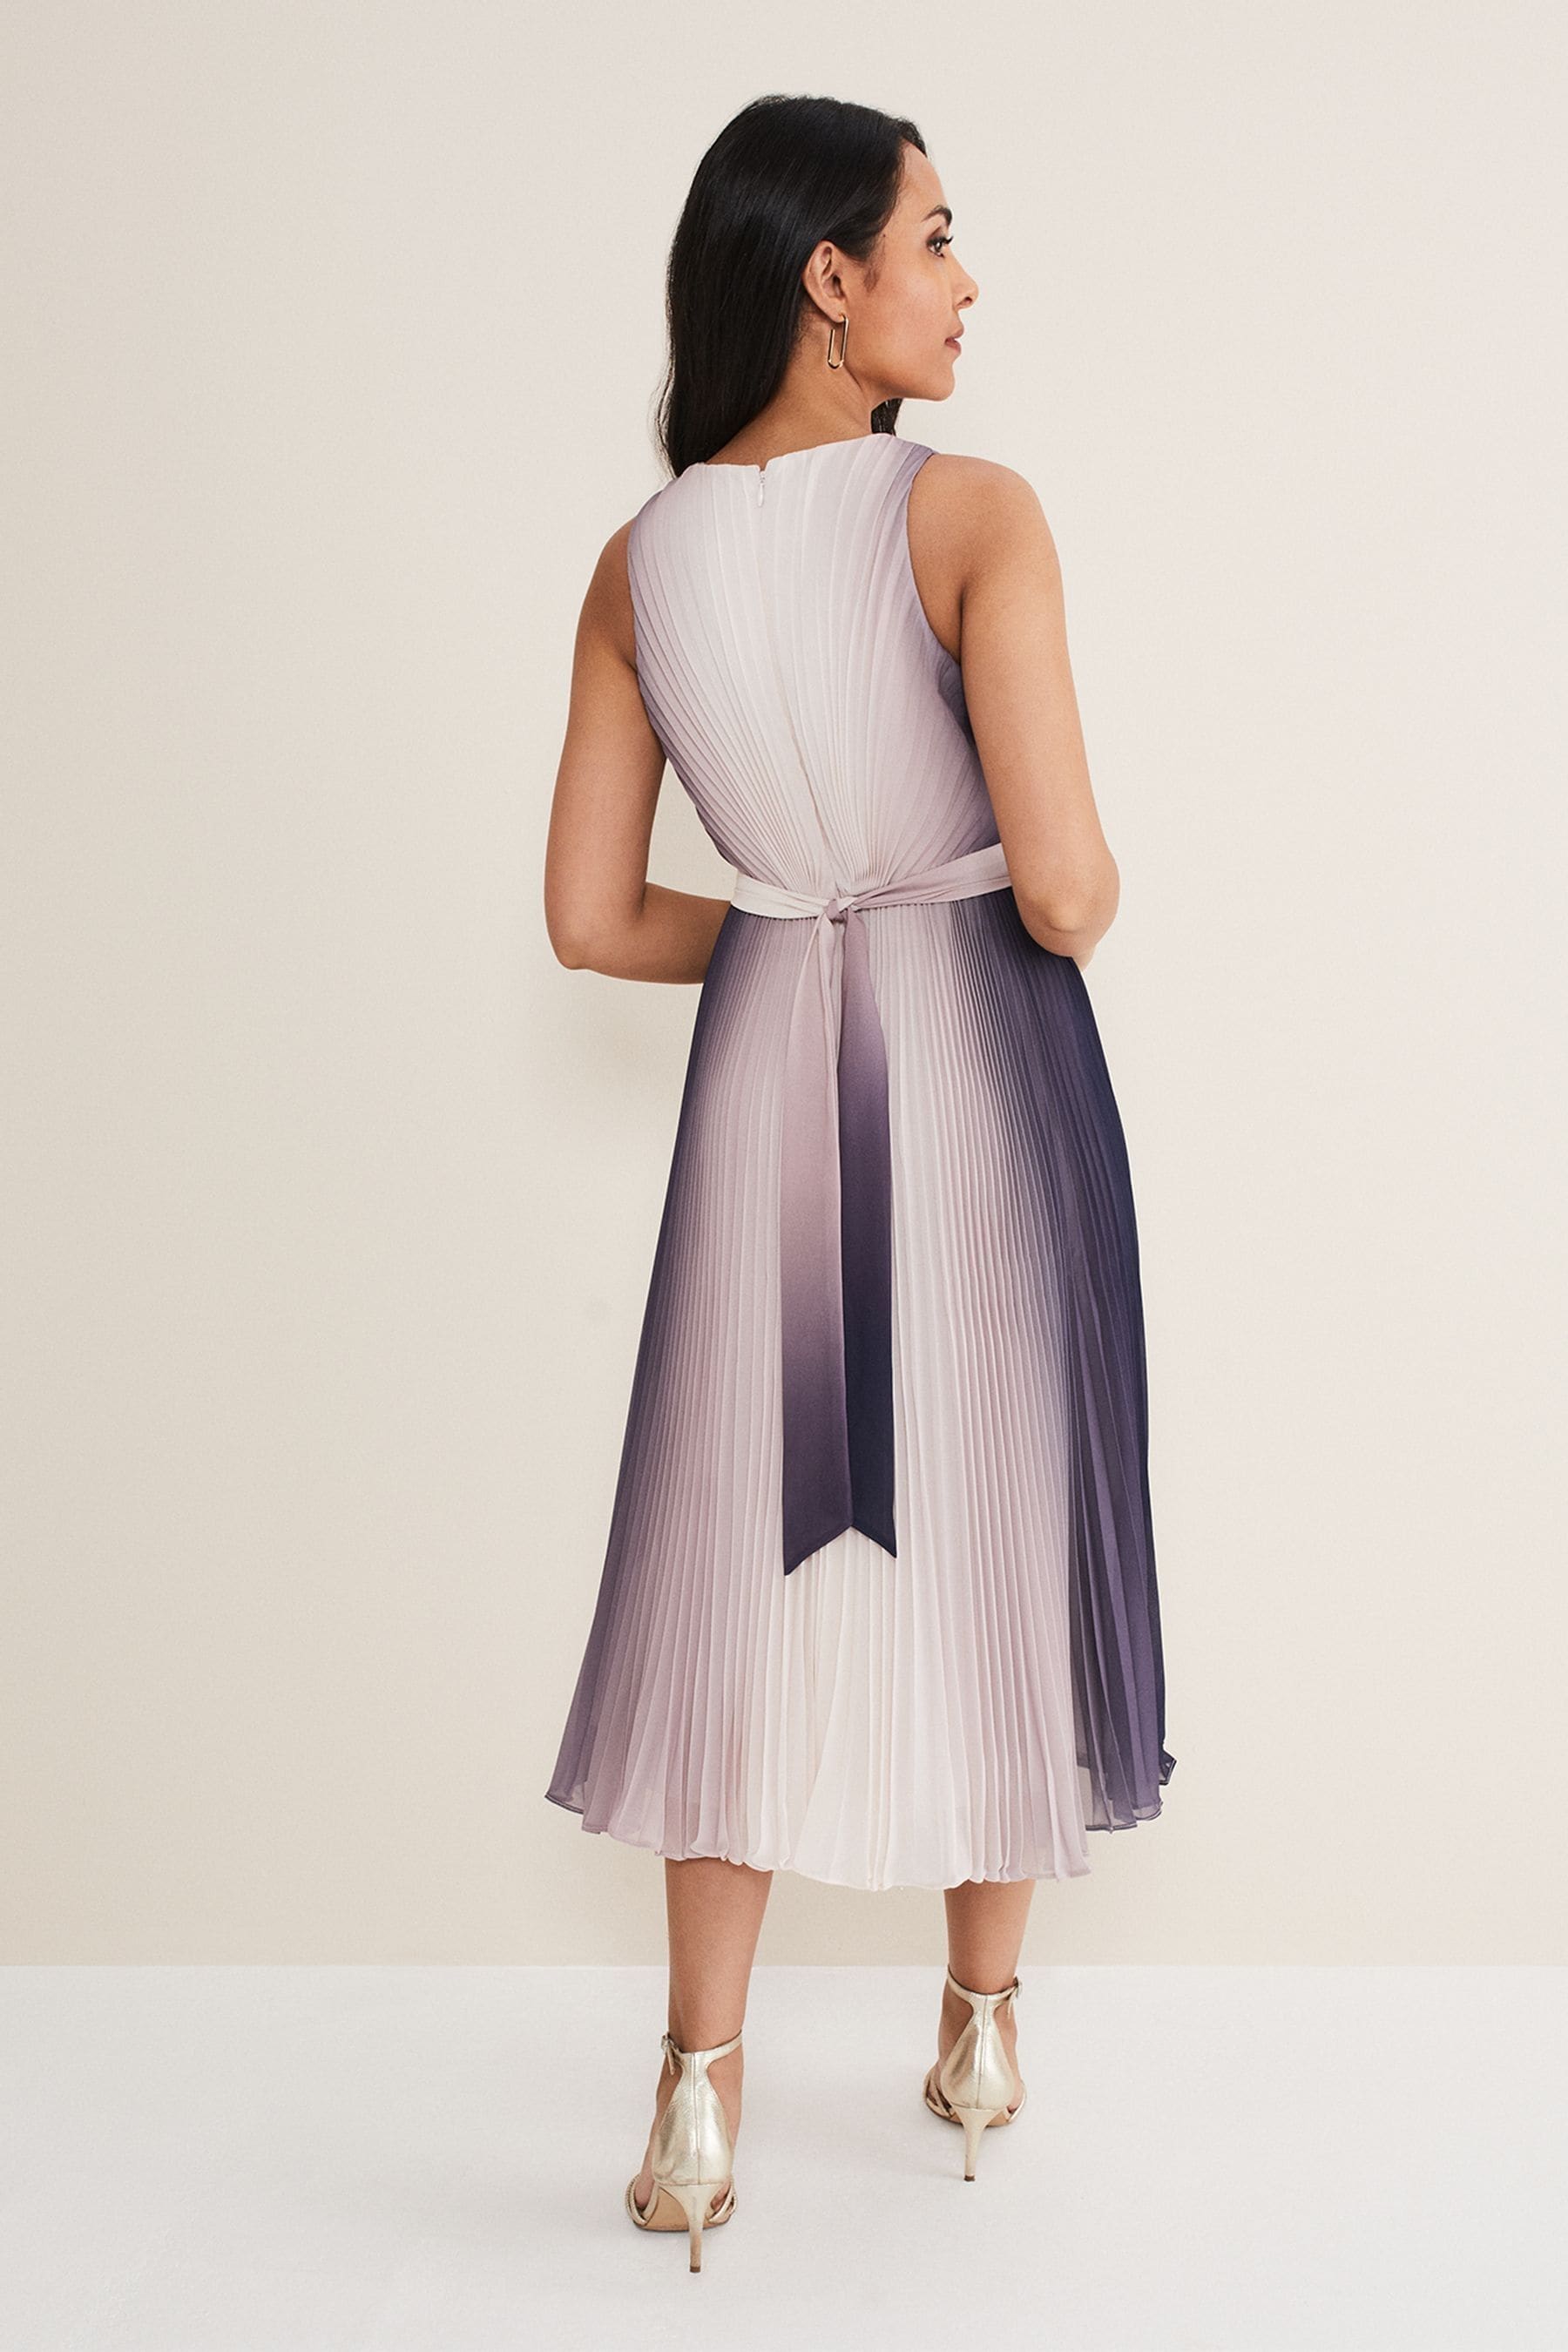 Buy Phase Eight Cream Petite Simara Ombre Dress from the Next UK online